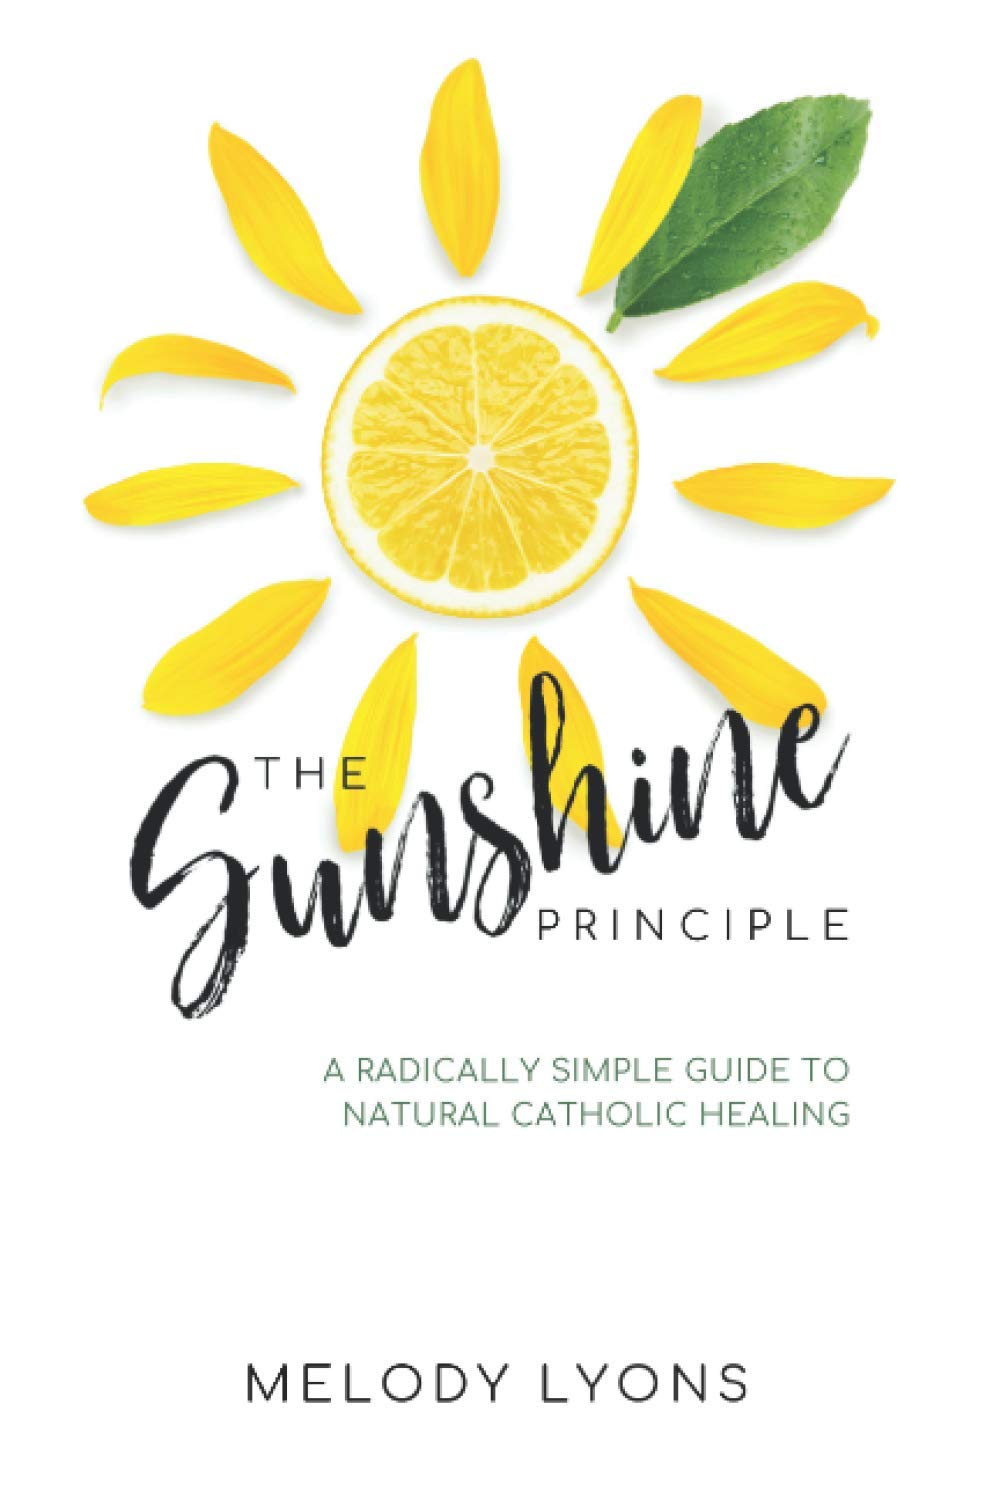 The Sunshine Principle: A Radically Simple Guide To Natural Catholic Healing